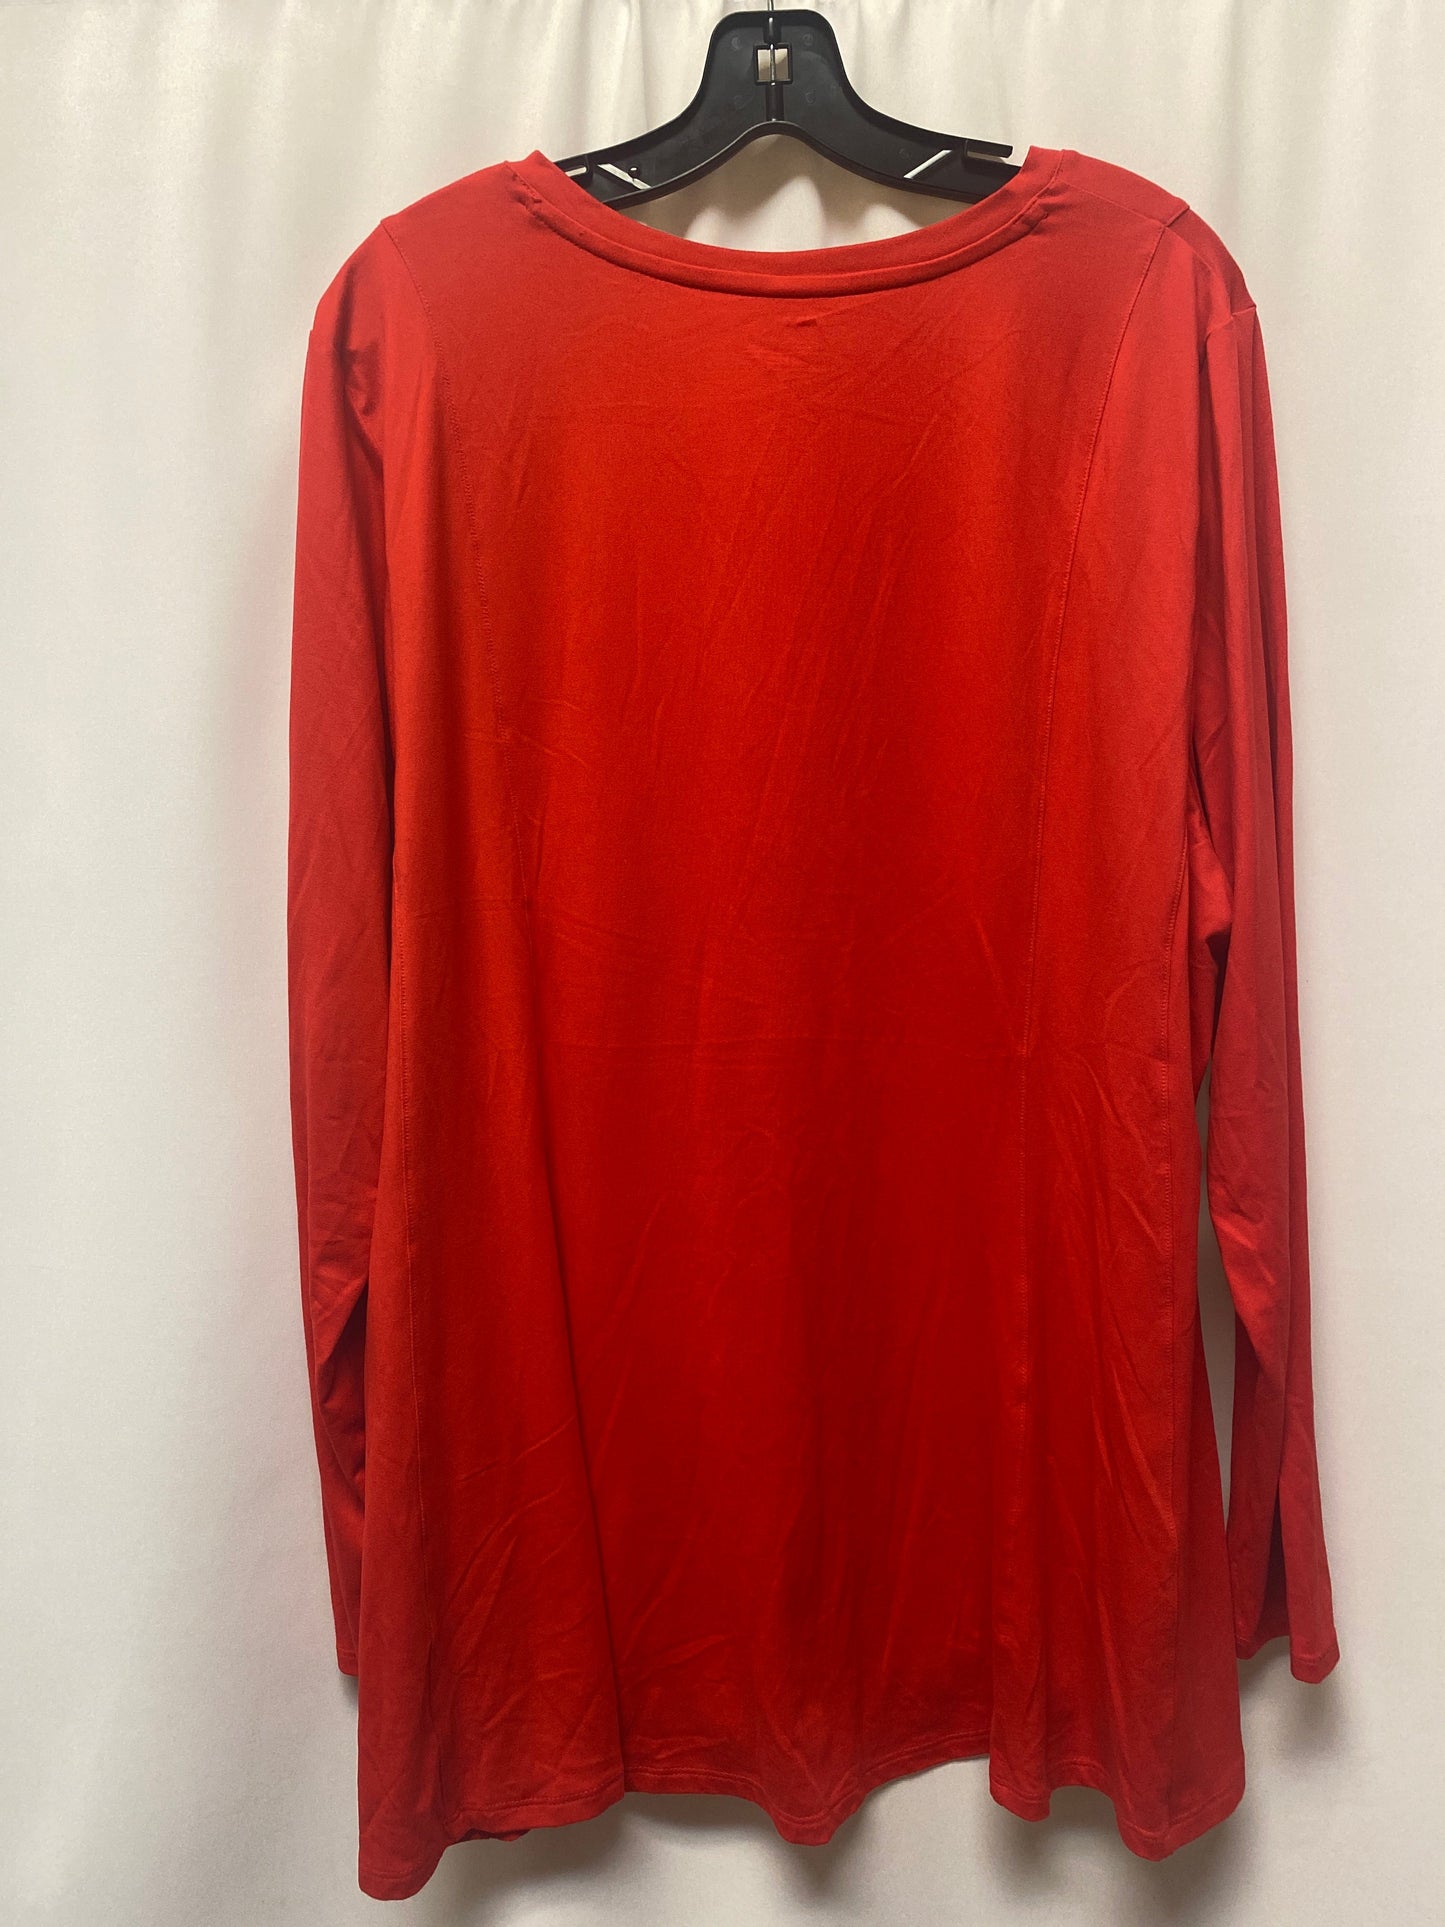 Red Top Long Sleeve Lane Bryant, Size 3x